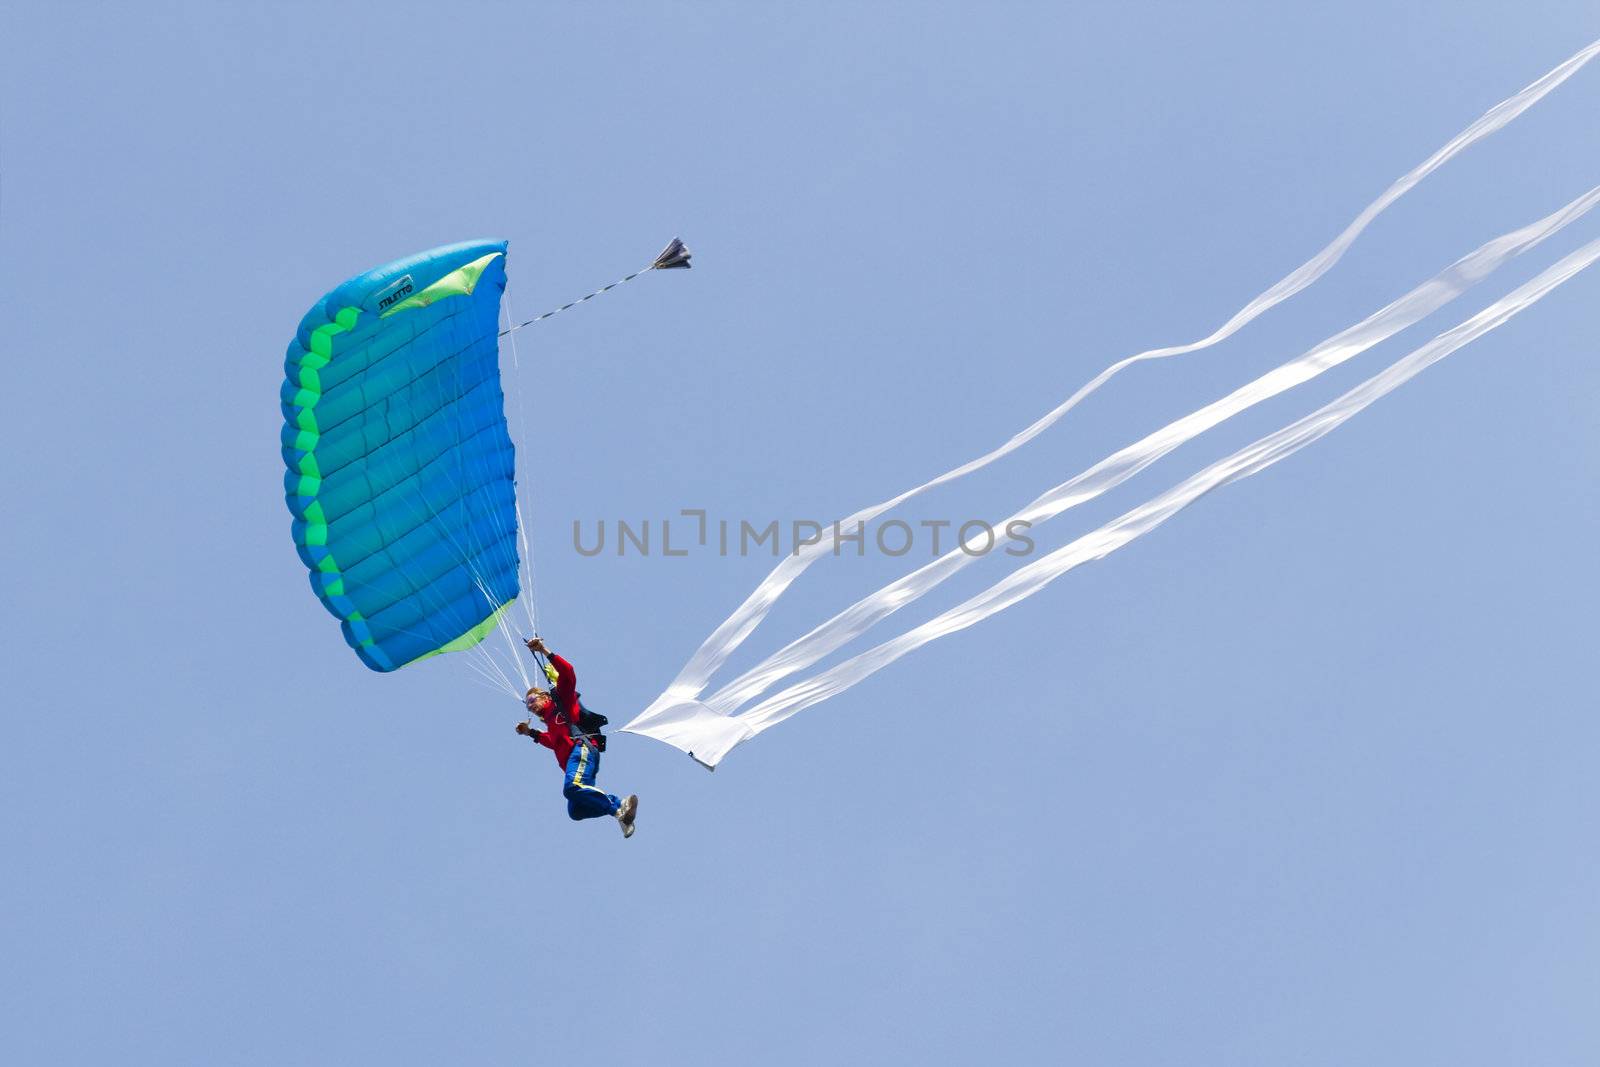 Parachutists demonstrate jumping from airplane by Colette